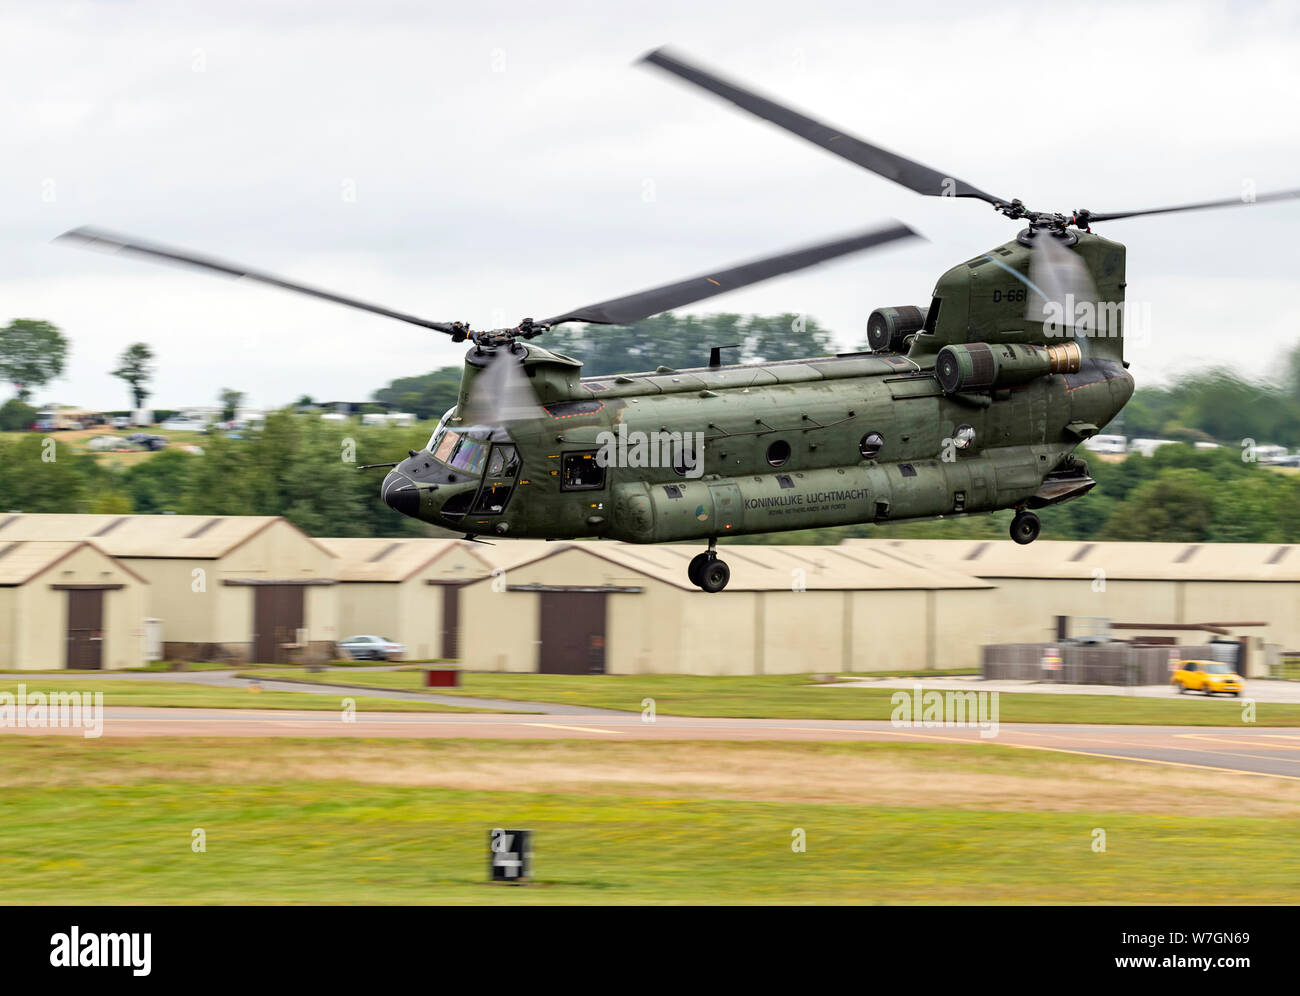 Royal Netherlands Air Force CH-47 elicottero Chinook di 298 Squadrone a RIAT 2019 Foto Stock